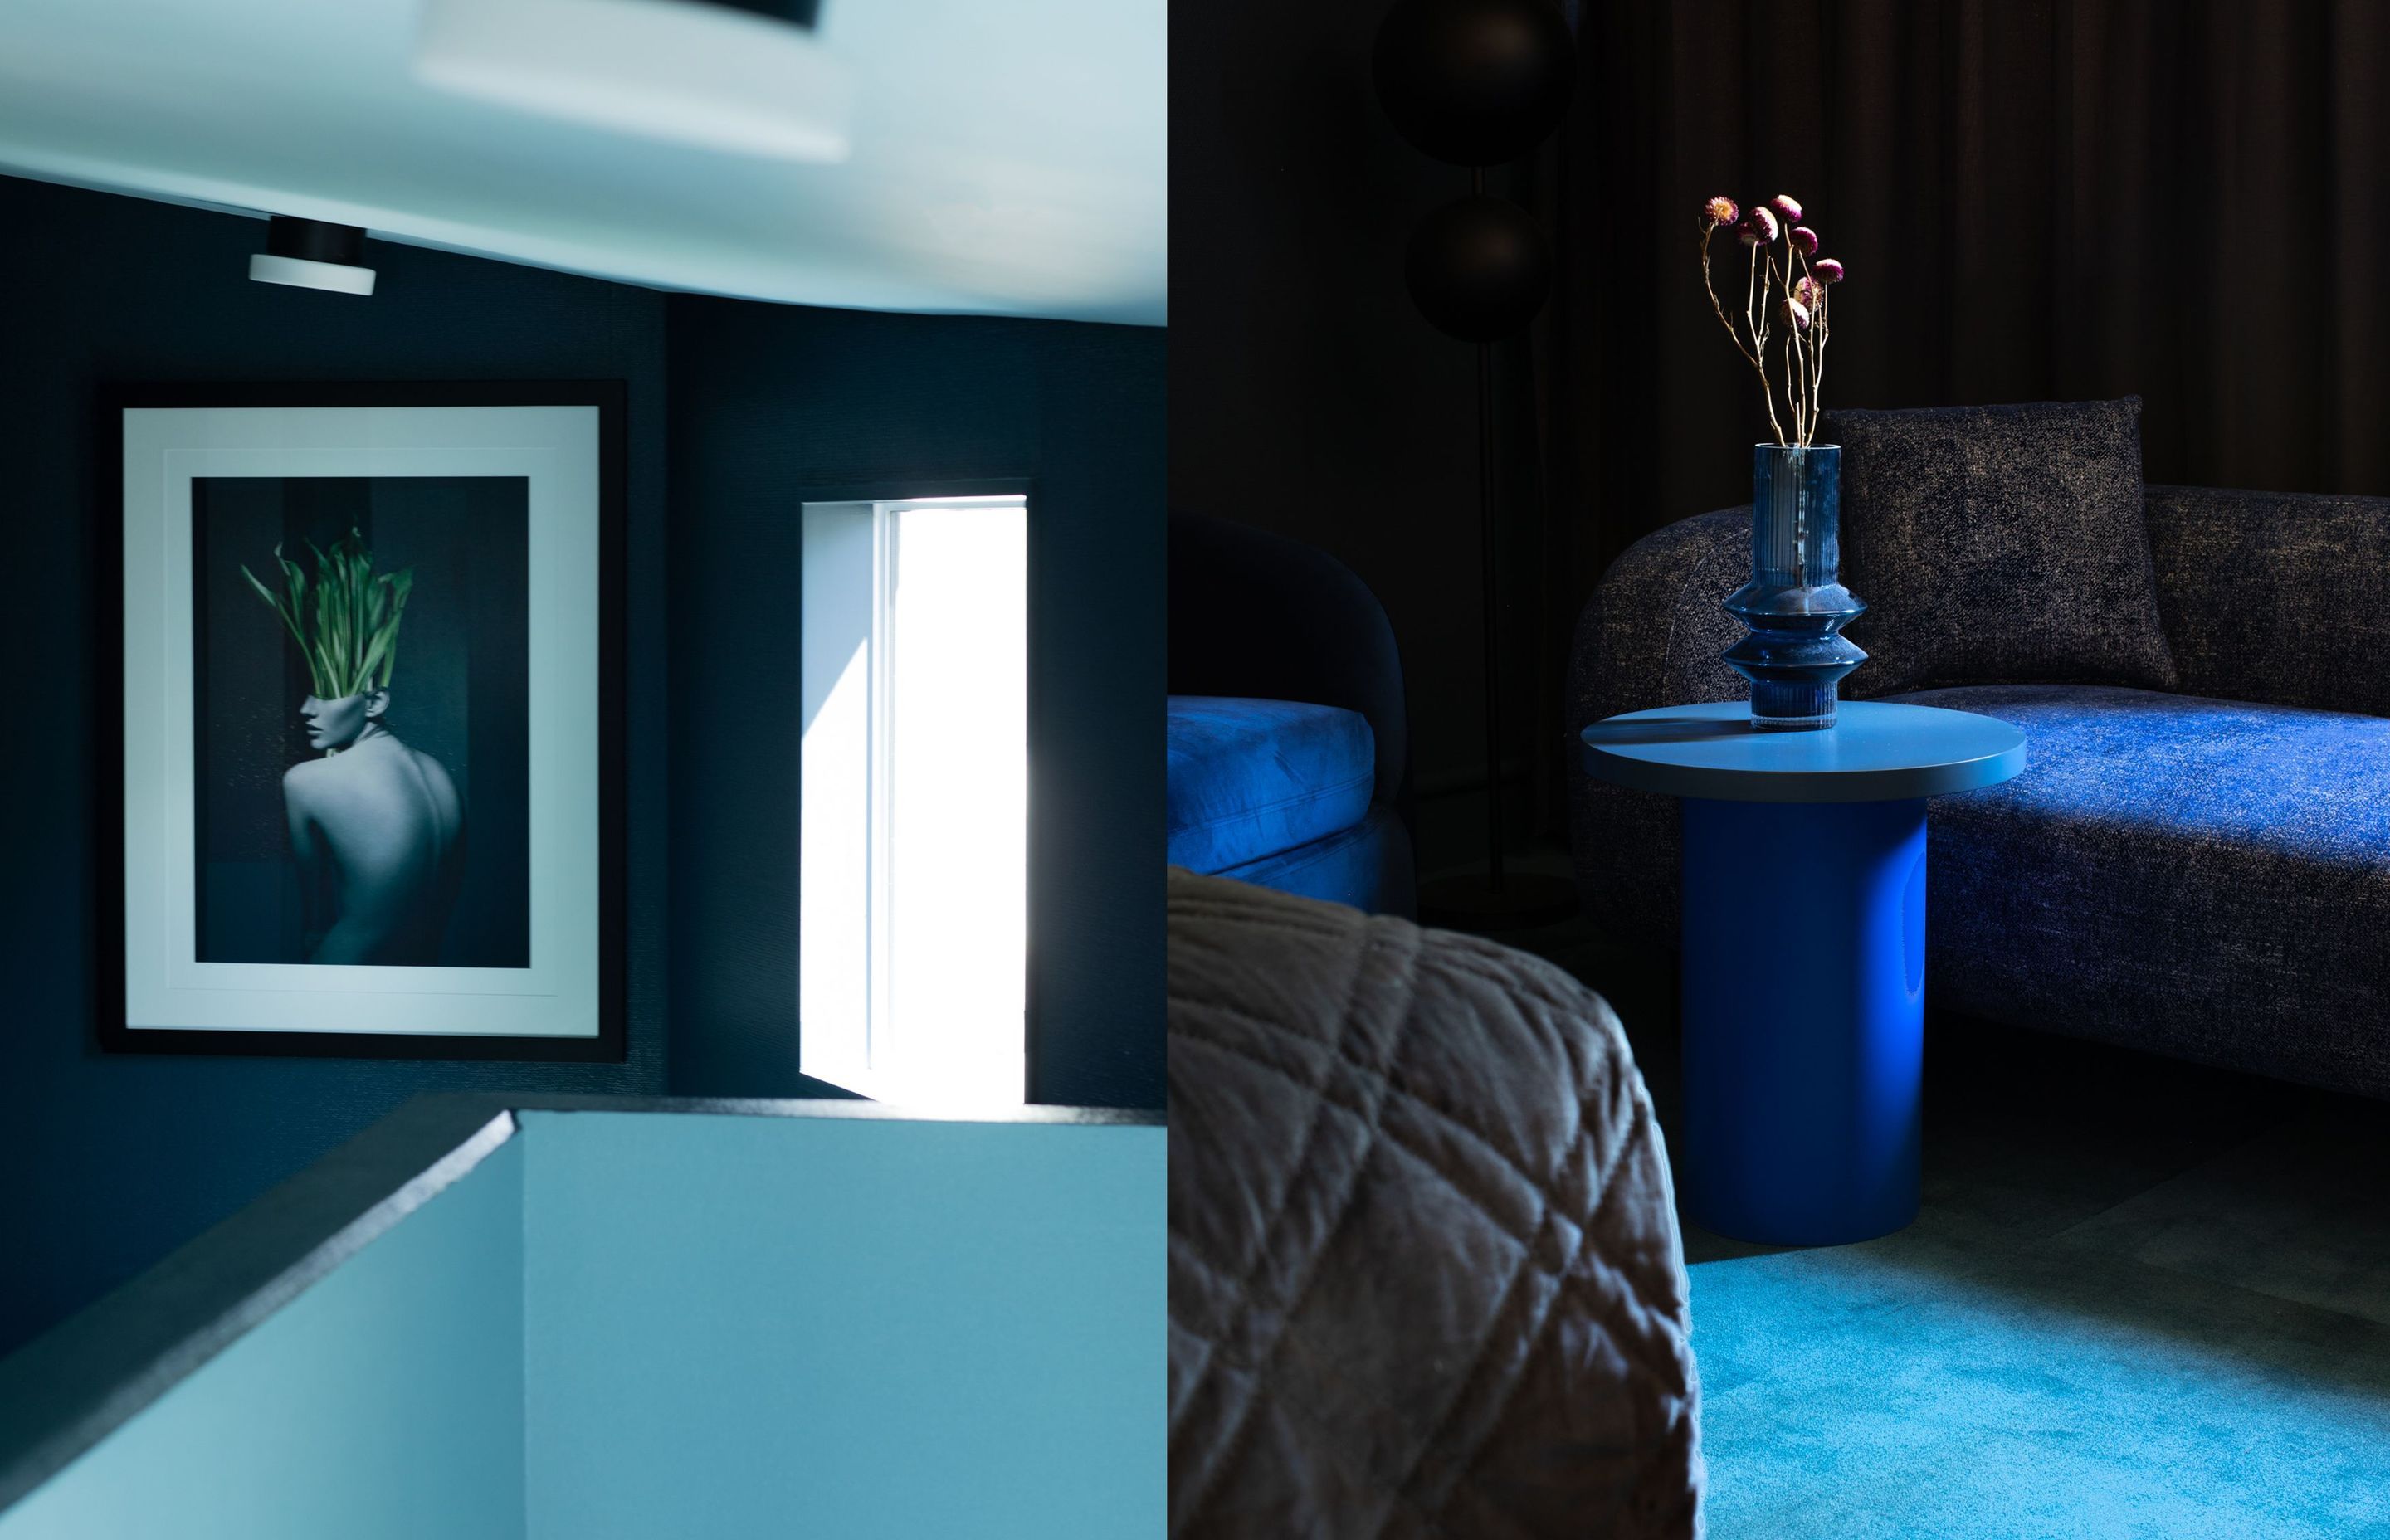 Entries open for the 36th Dulux Colour Awards®